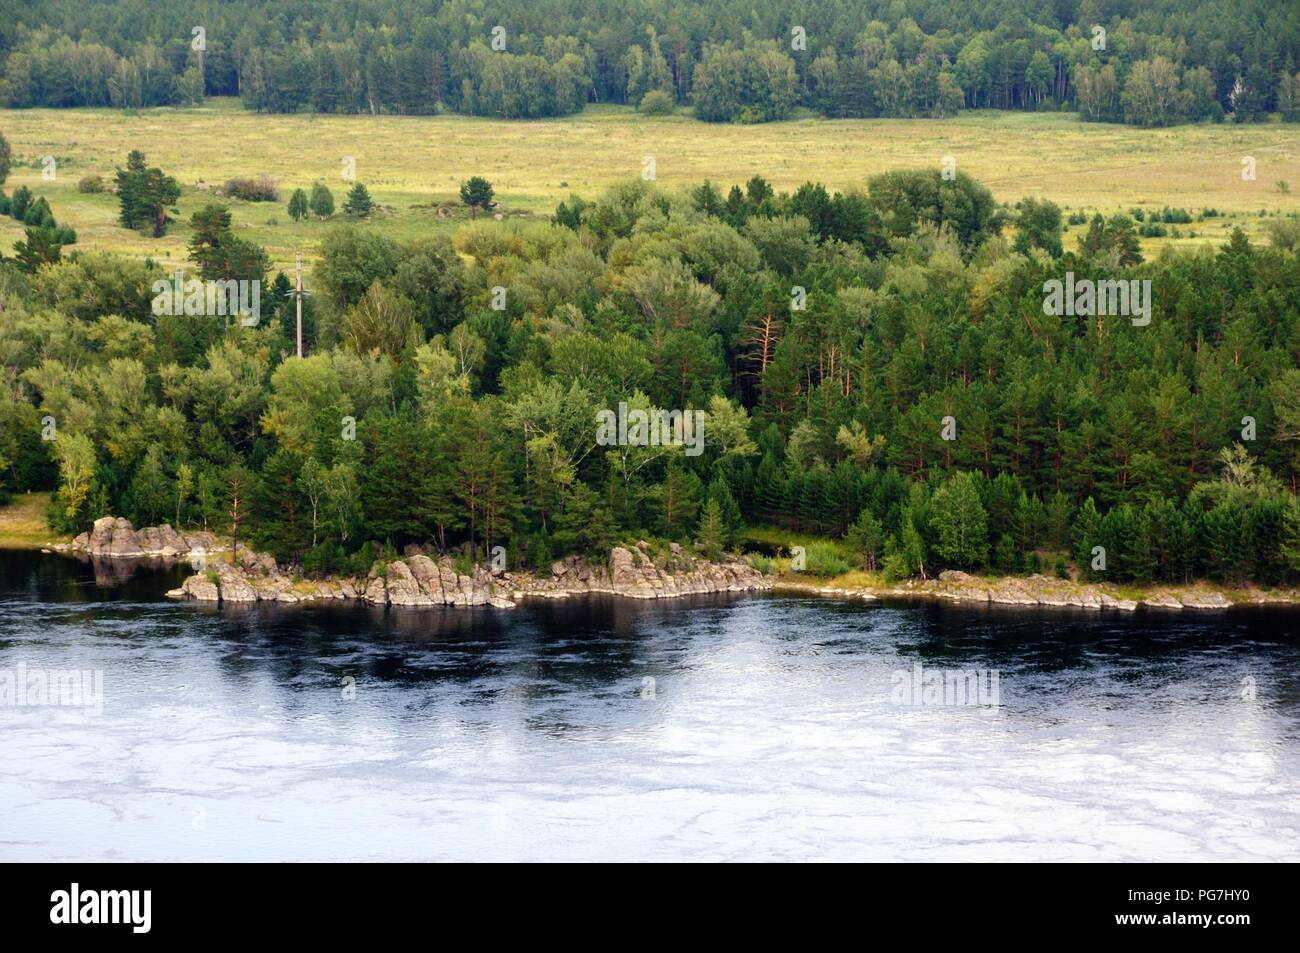 Rocky bank of the Yenisey river near the town of Sayanogorsk, Khakassia, Russia. Stock Photo